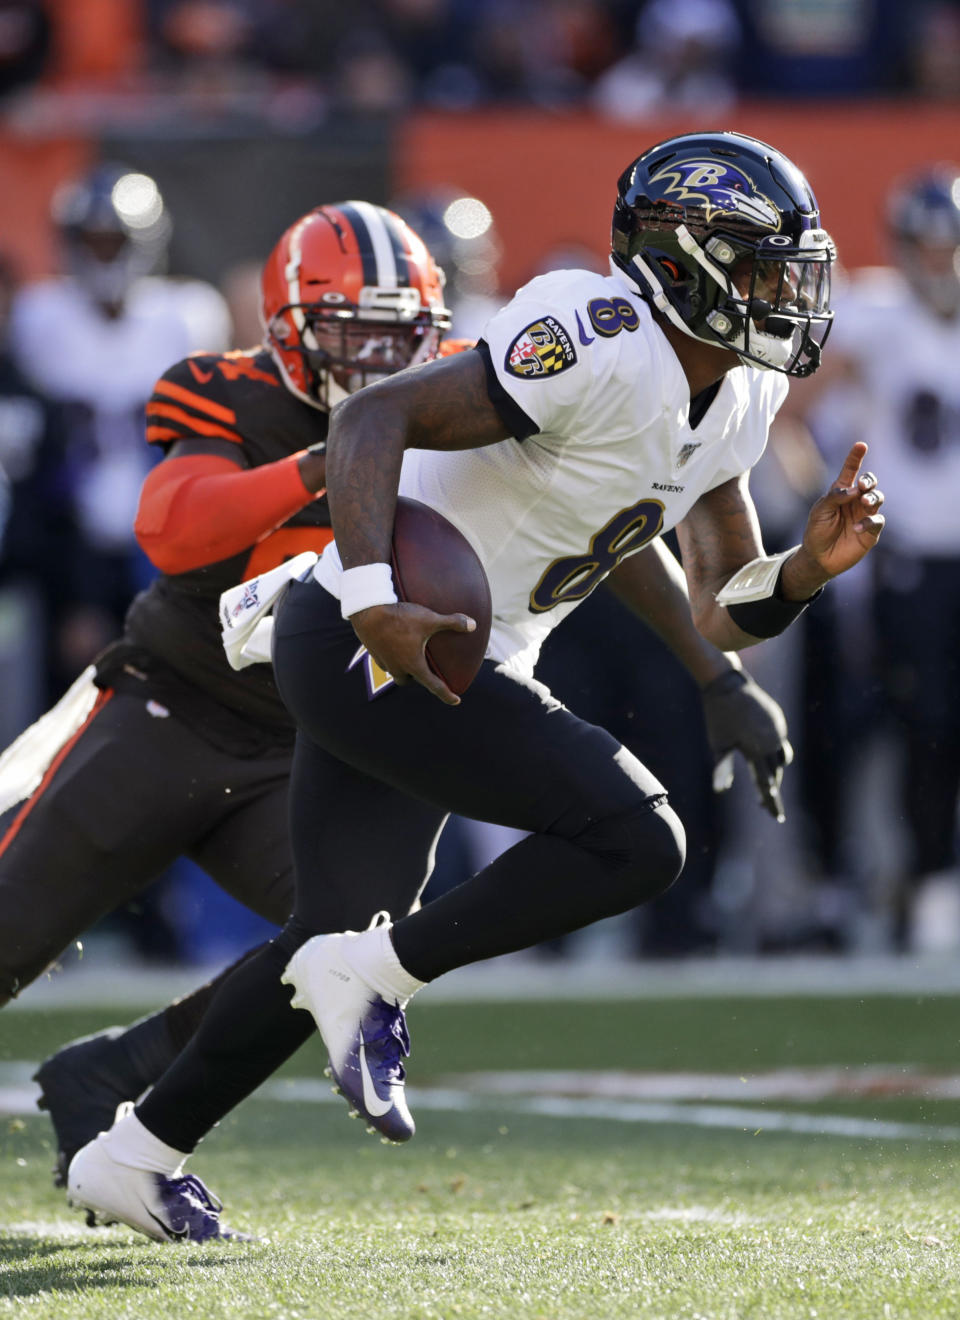 Baltimore Ravens quarterback Lamar Jackson rushes against the Cleveland Browns during the first half of an NFL football game, Sunday, Dec. 22, 2019, in Cleveland. (AP Photo/Ron Schwane)